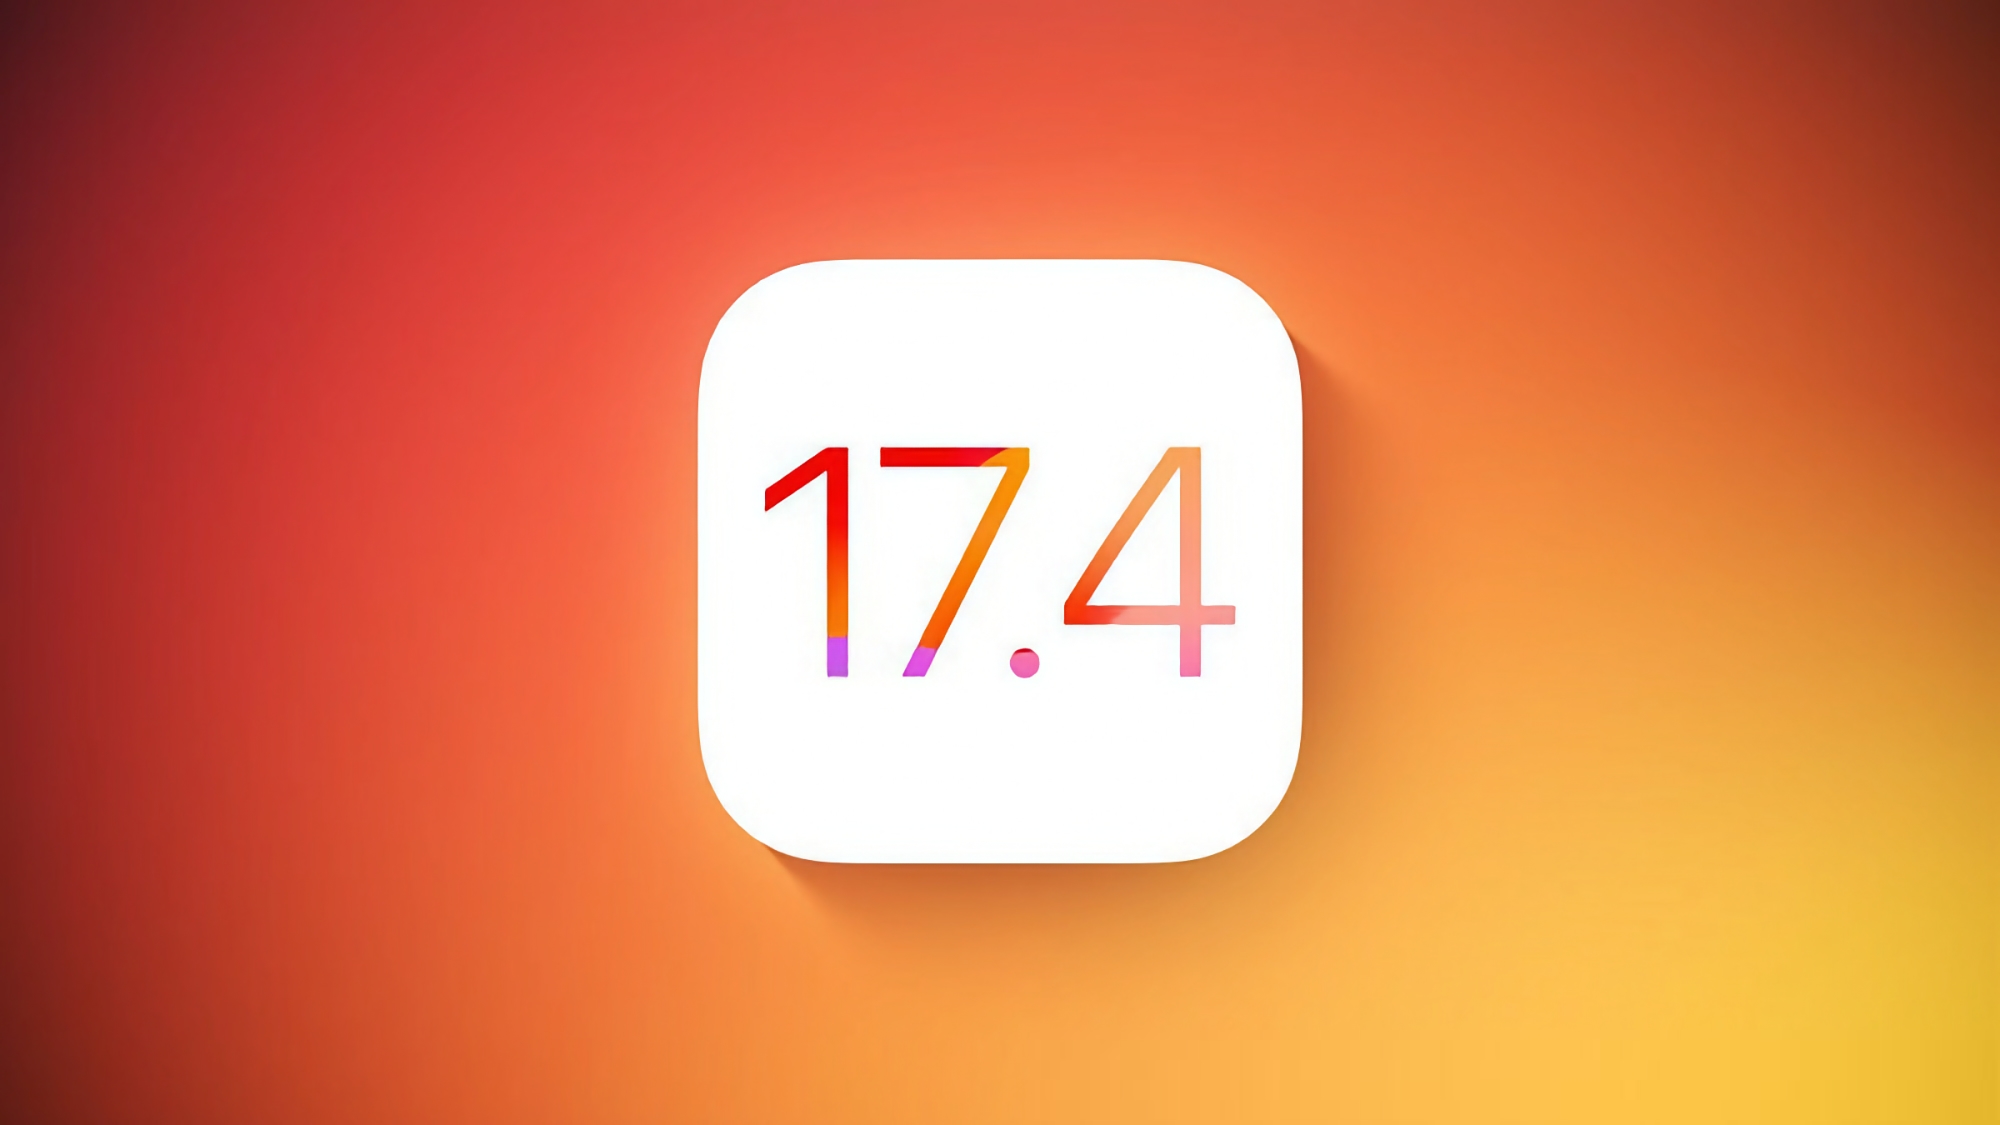 Apple has released the second beta of iOS 17.4